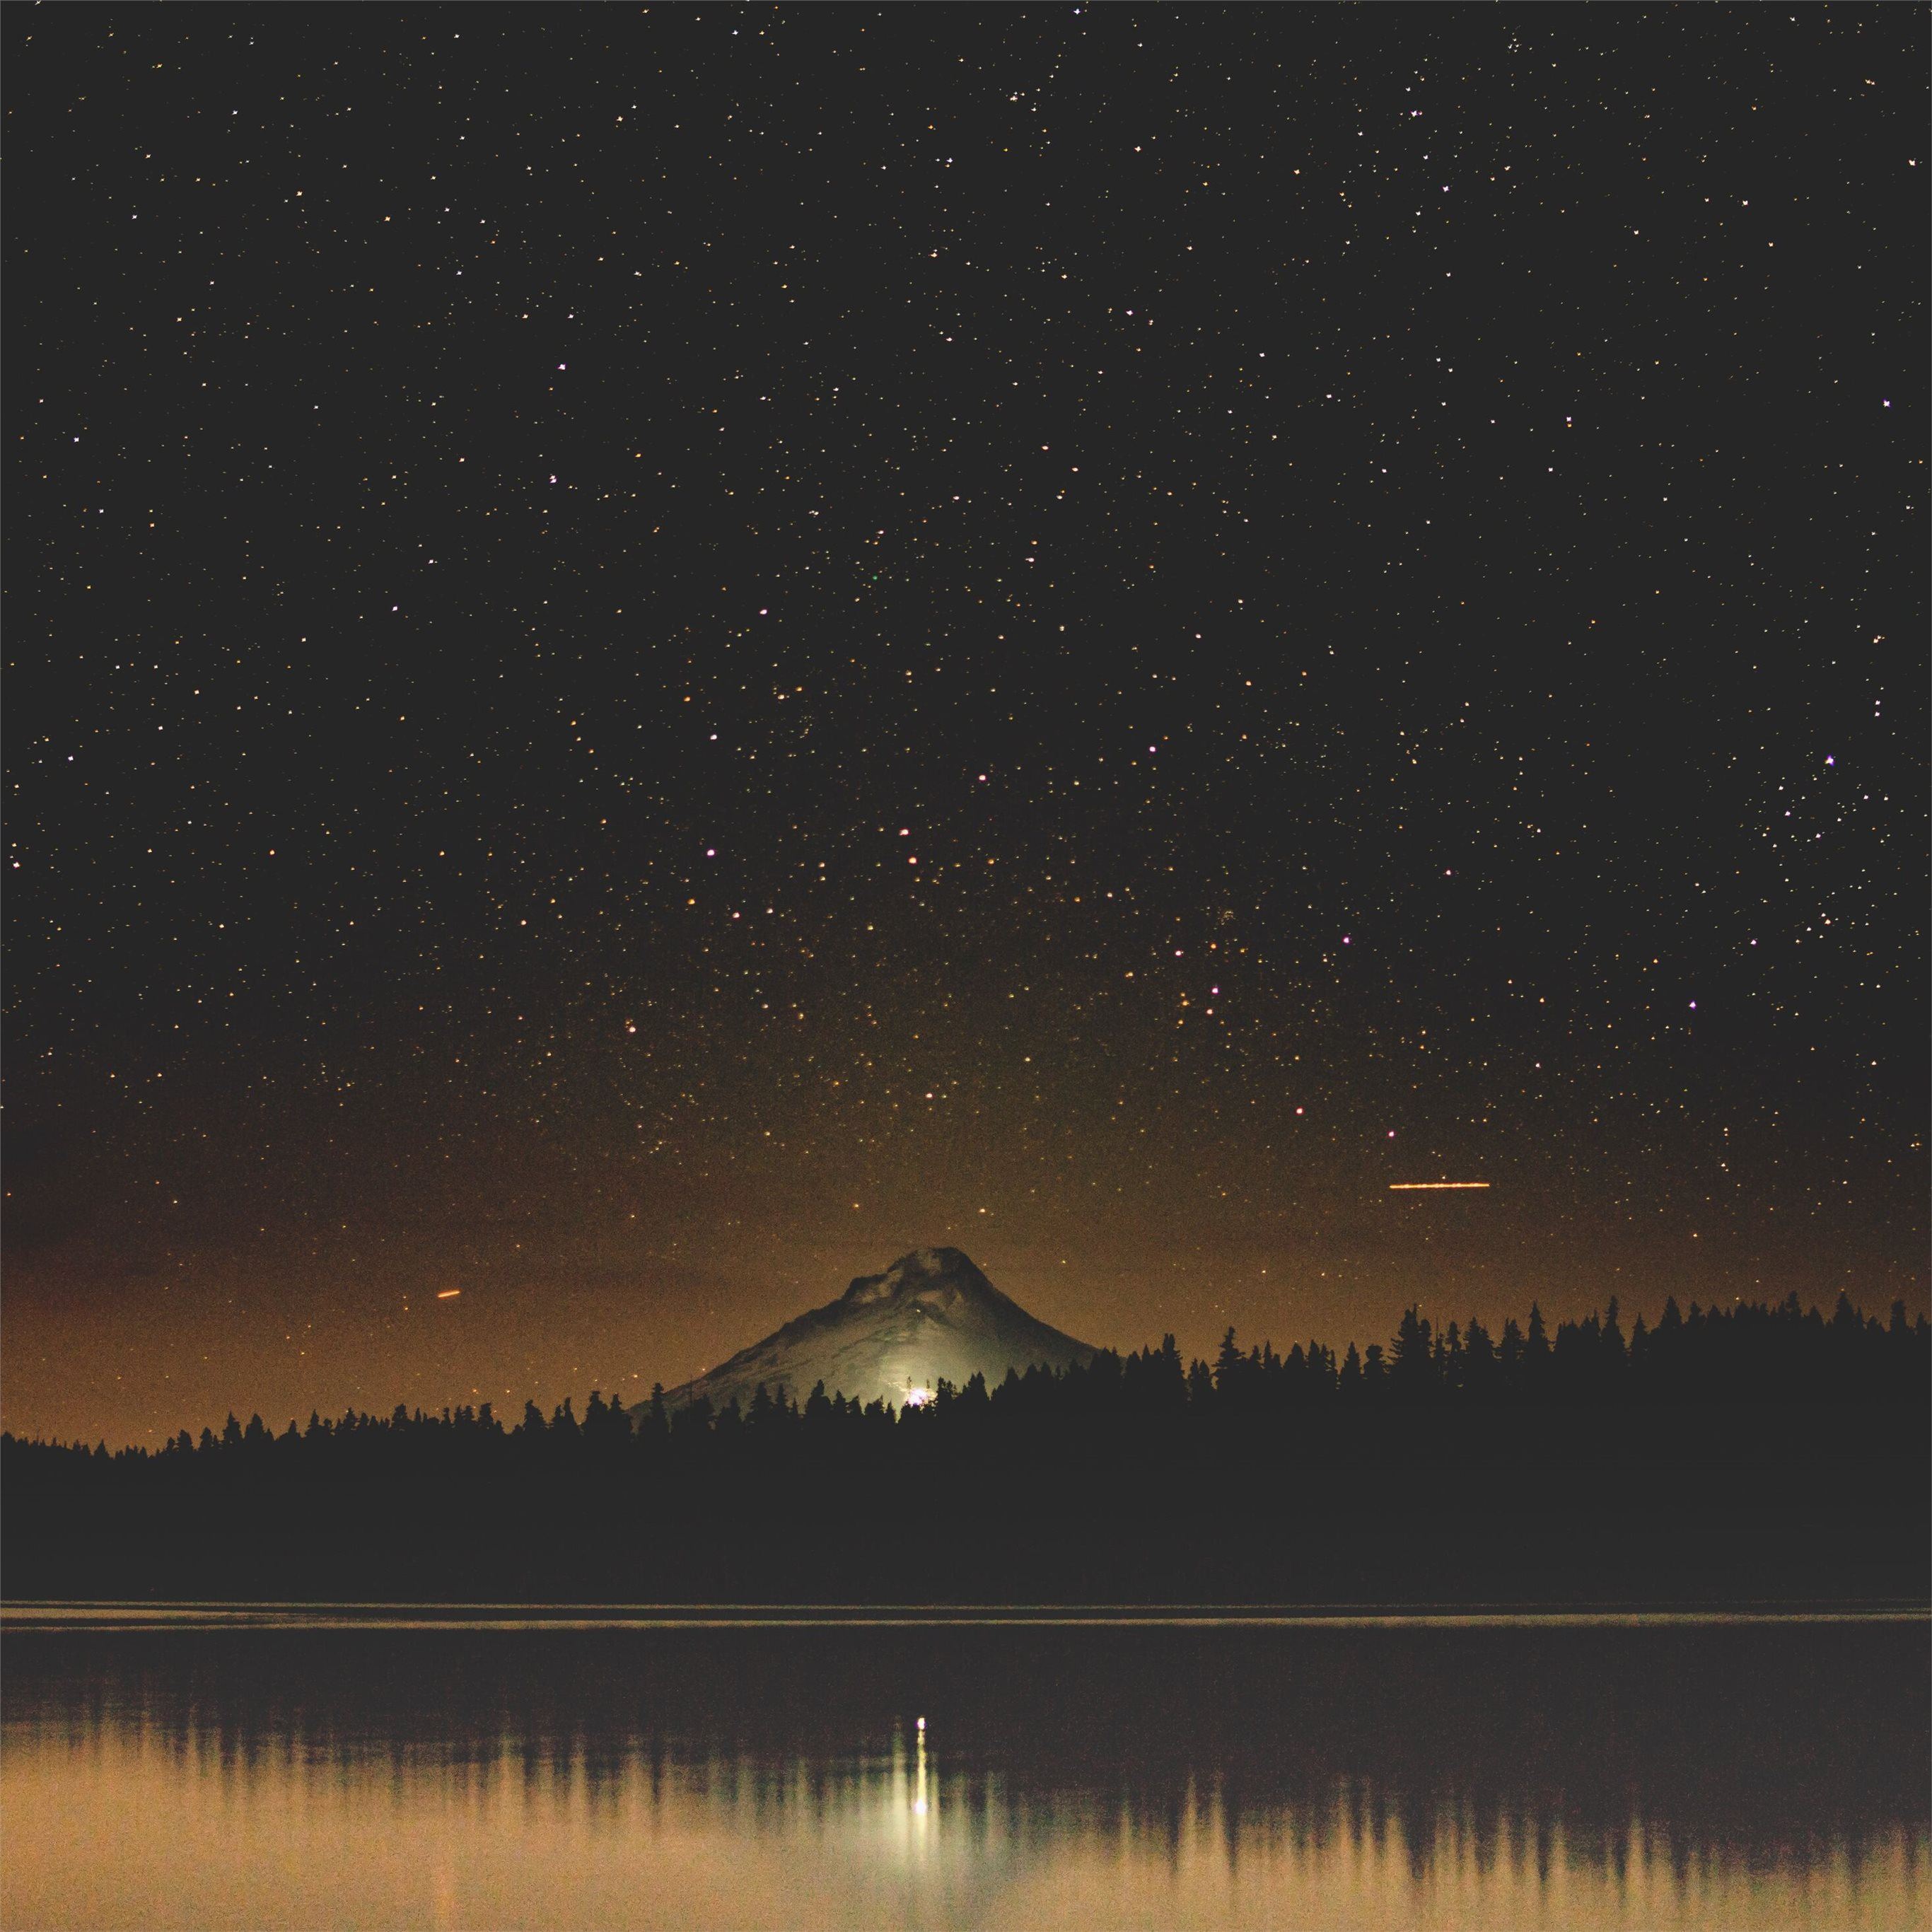 Mt Hood Shooting Store Reflection View 8k Ipad Pro Wallpapers Free Download